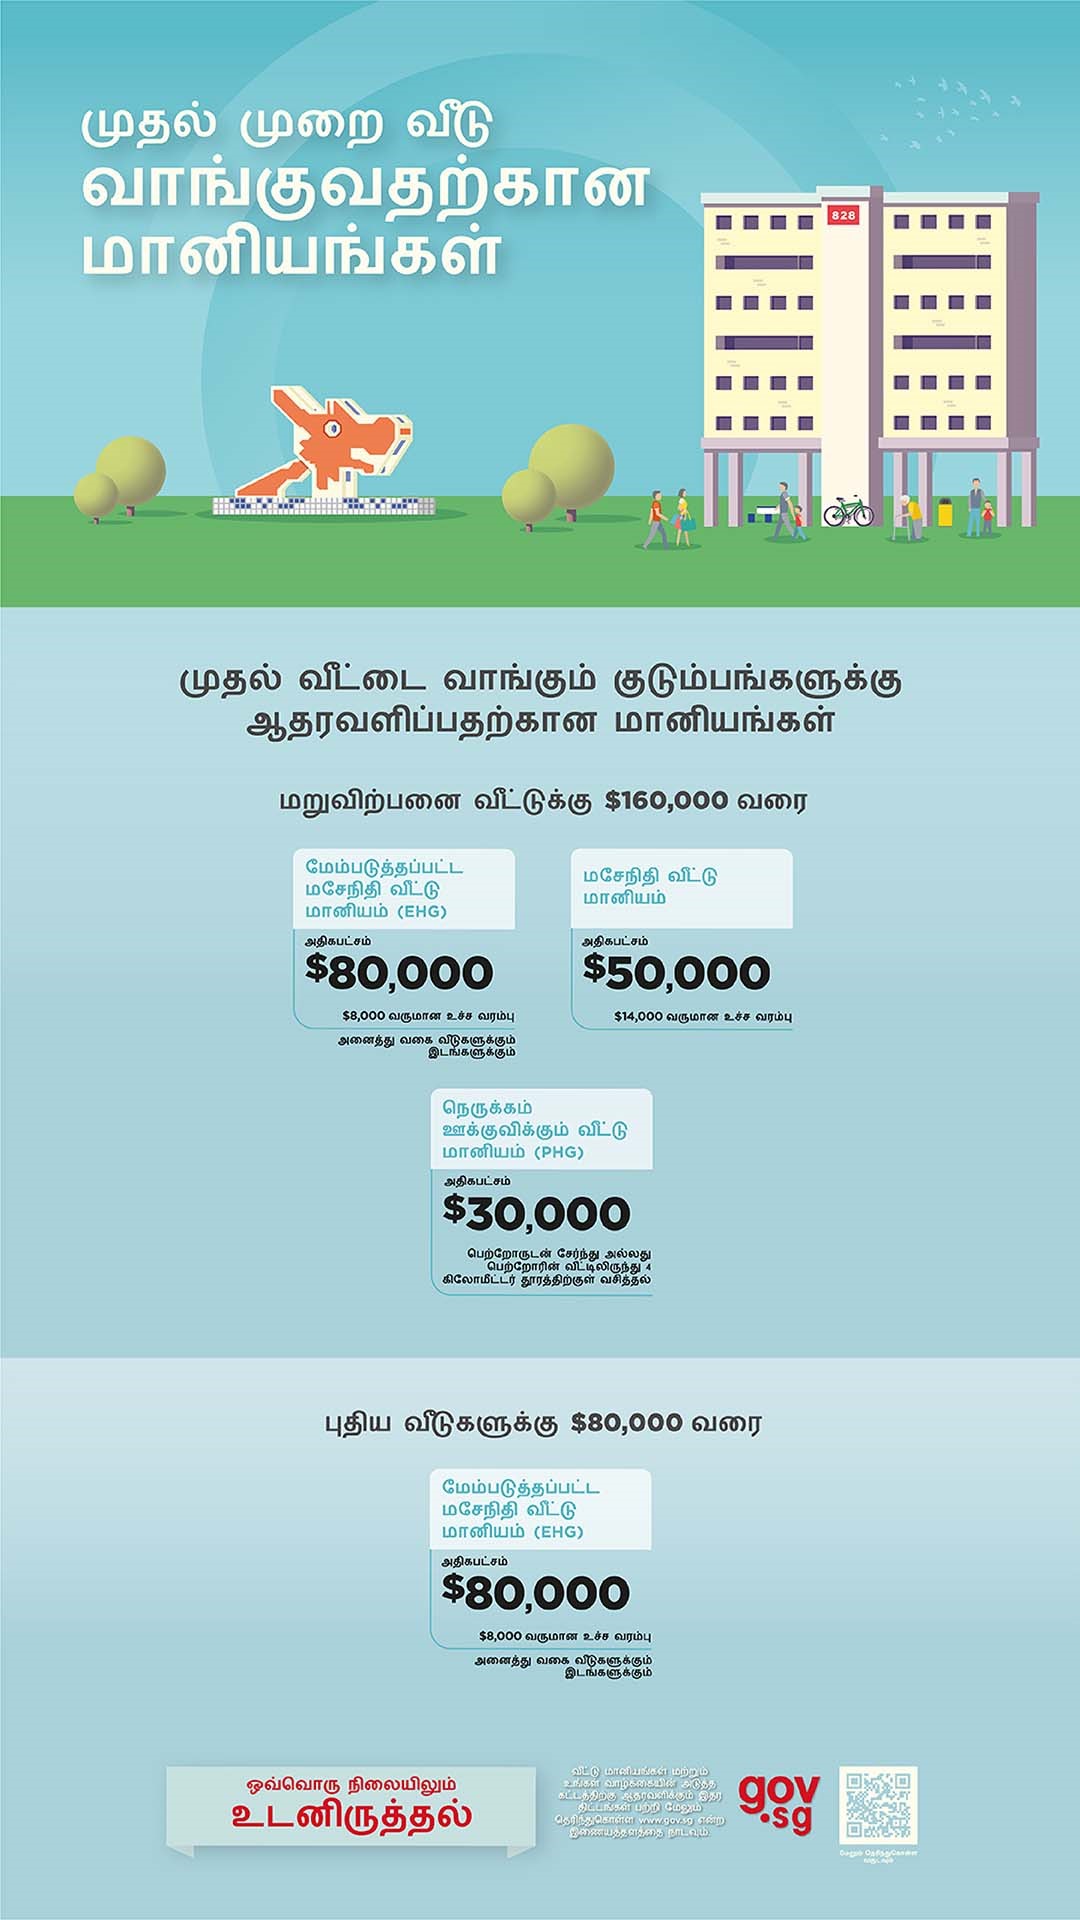 Tamil - Supporting you in your home ownership journey